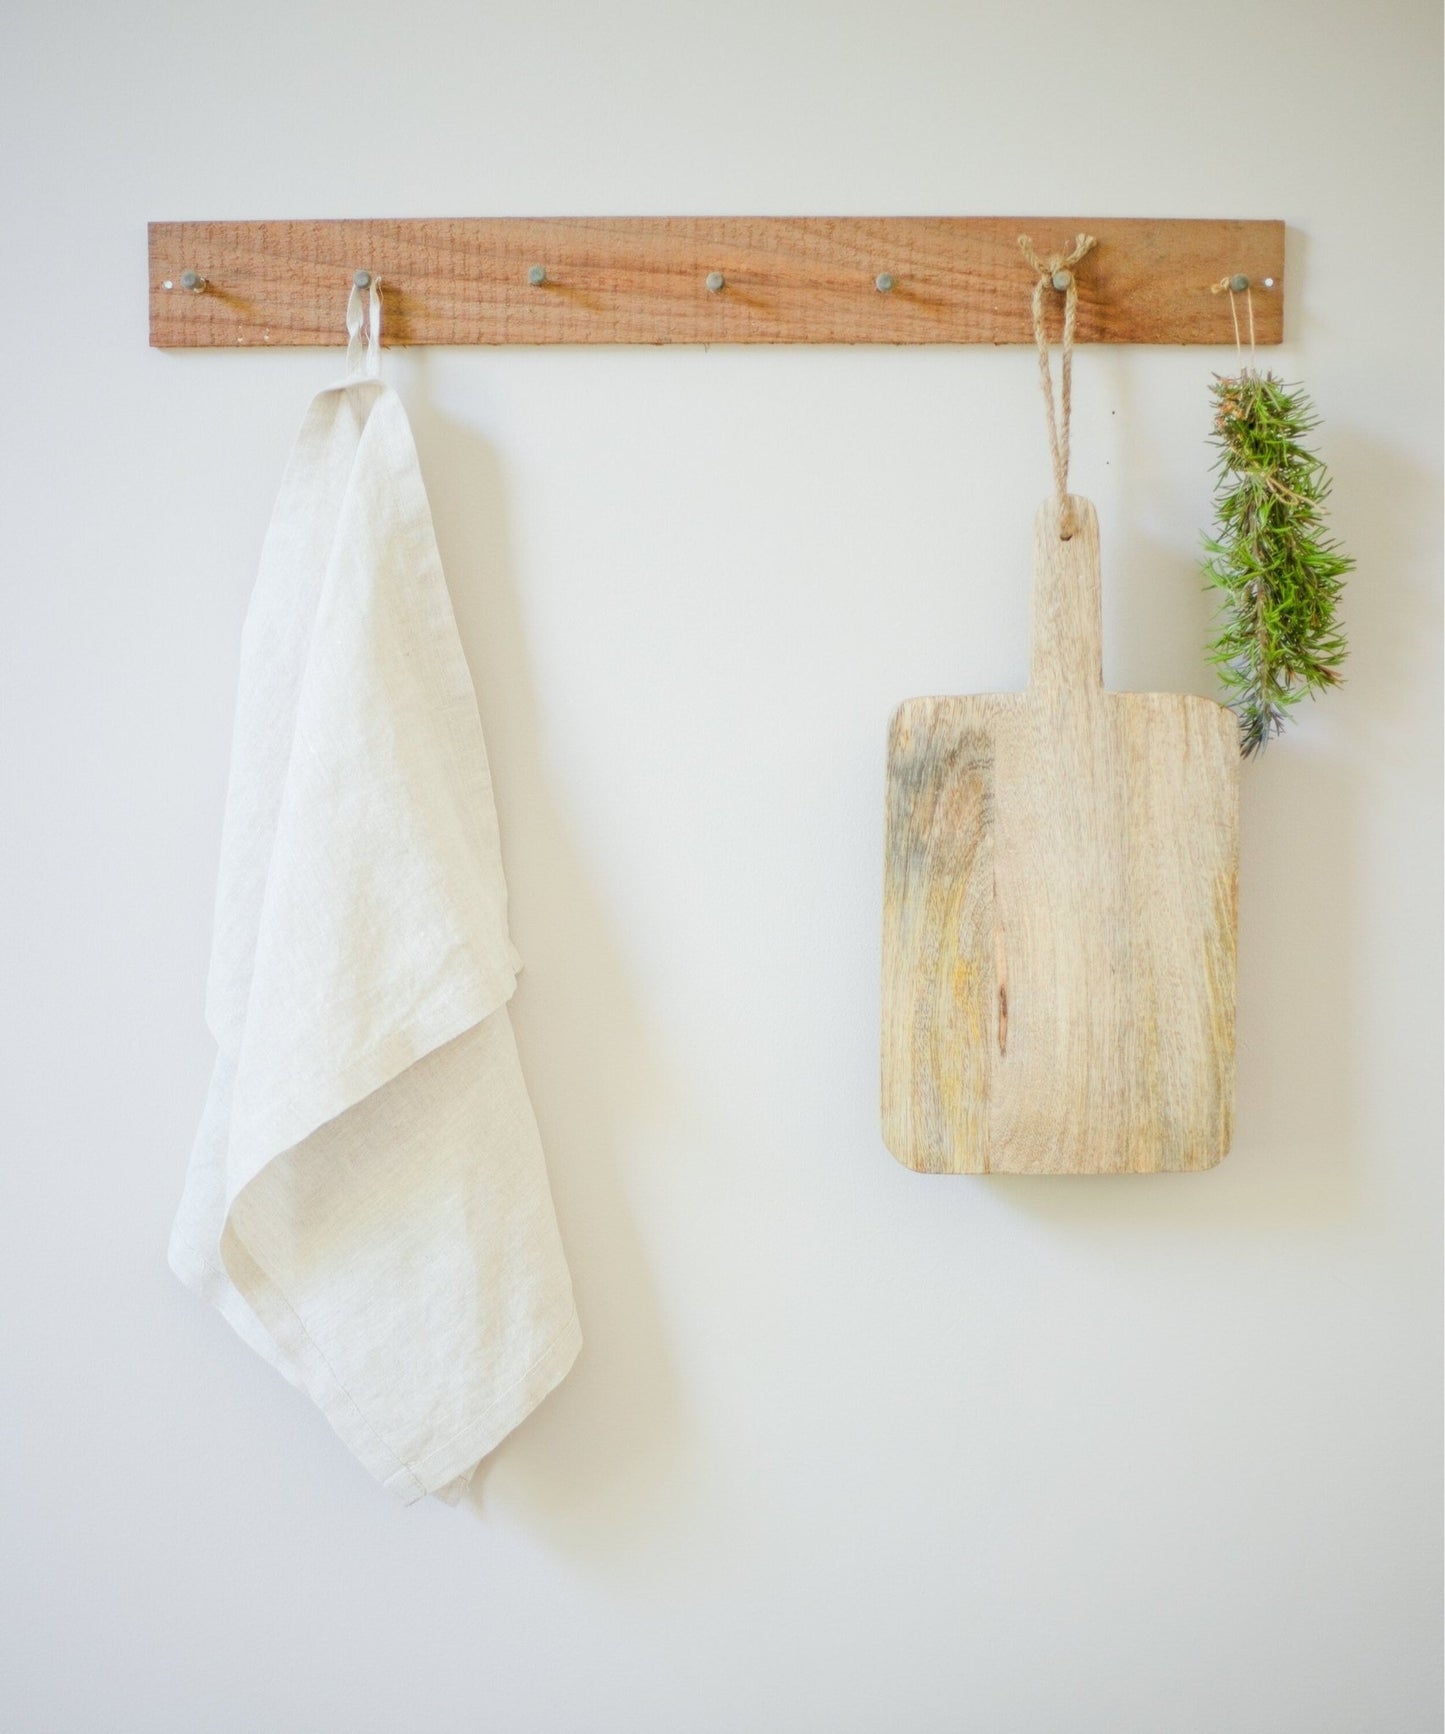 Load image into Gallery viewer, Linen Tea Dish Towel | Washed Linen Kitchen Towel | Guest Hand Towel Natural Dish Towel | Natural Linen Dishcloths Towel For Kitchen Home
